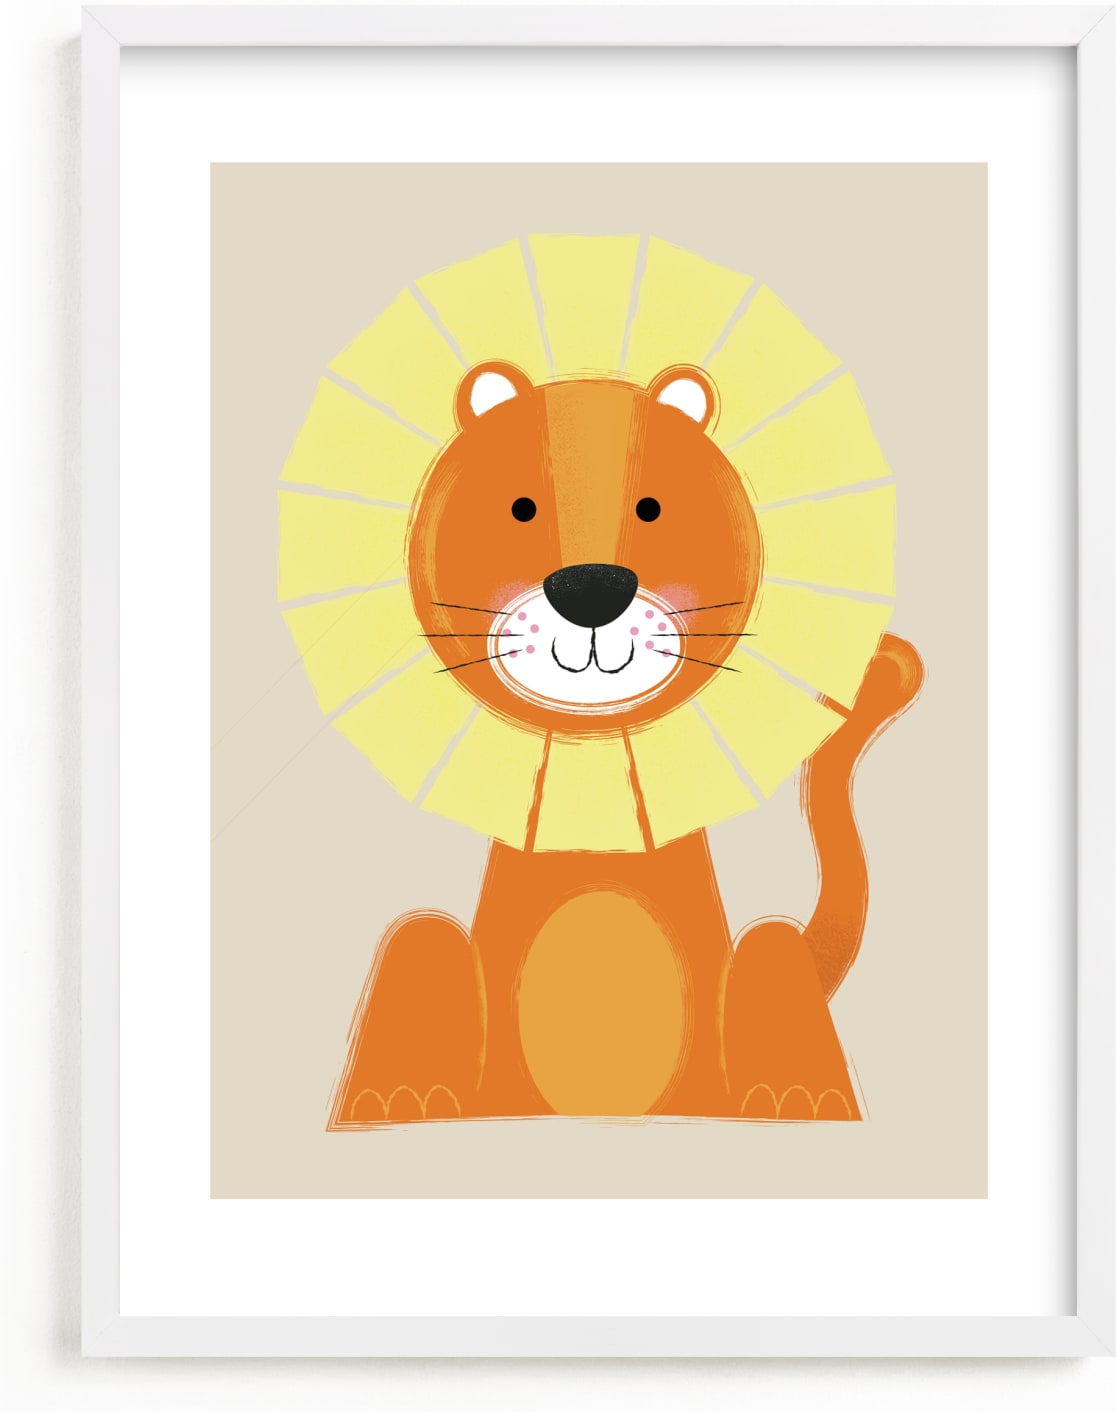 This is a yellow kids wall art by Ashlee Townsend called Mr. Lion.